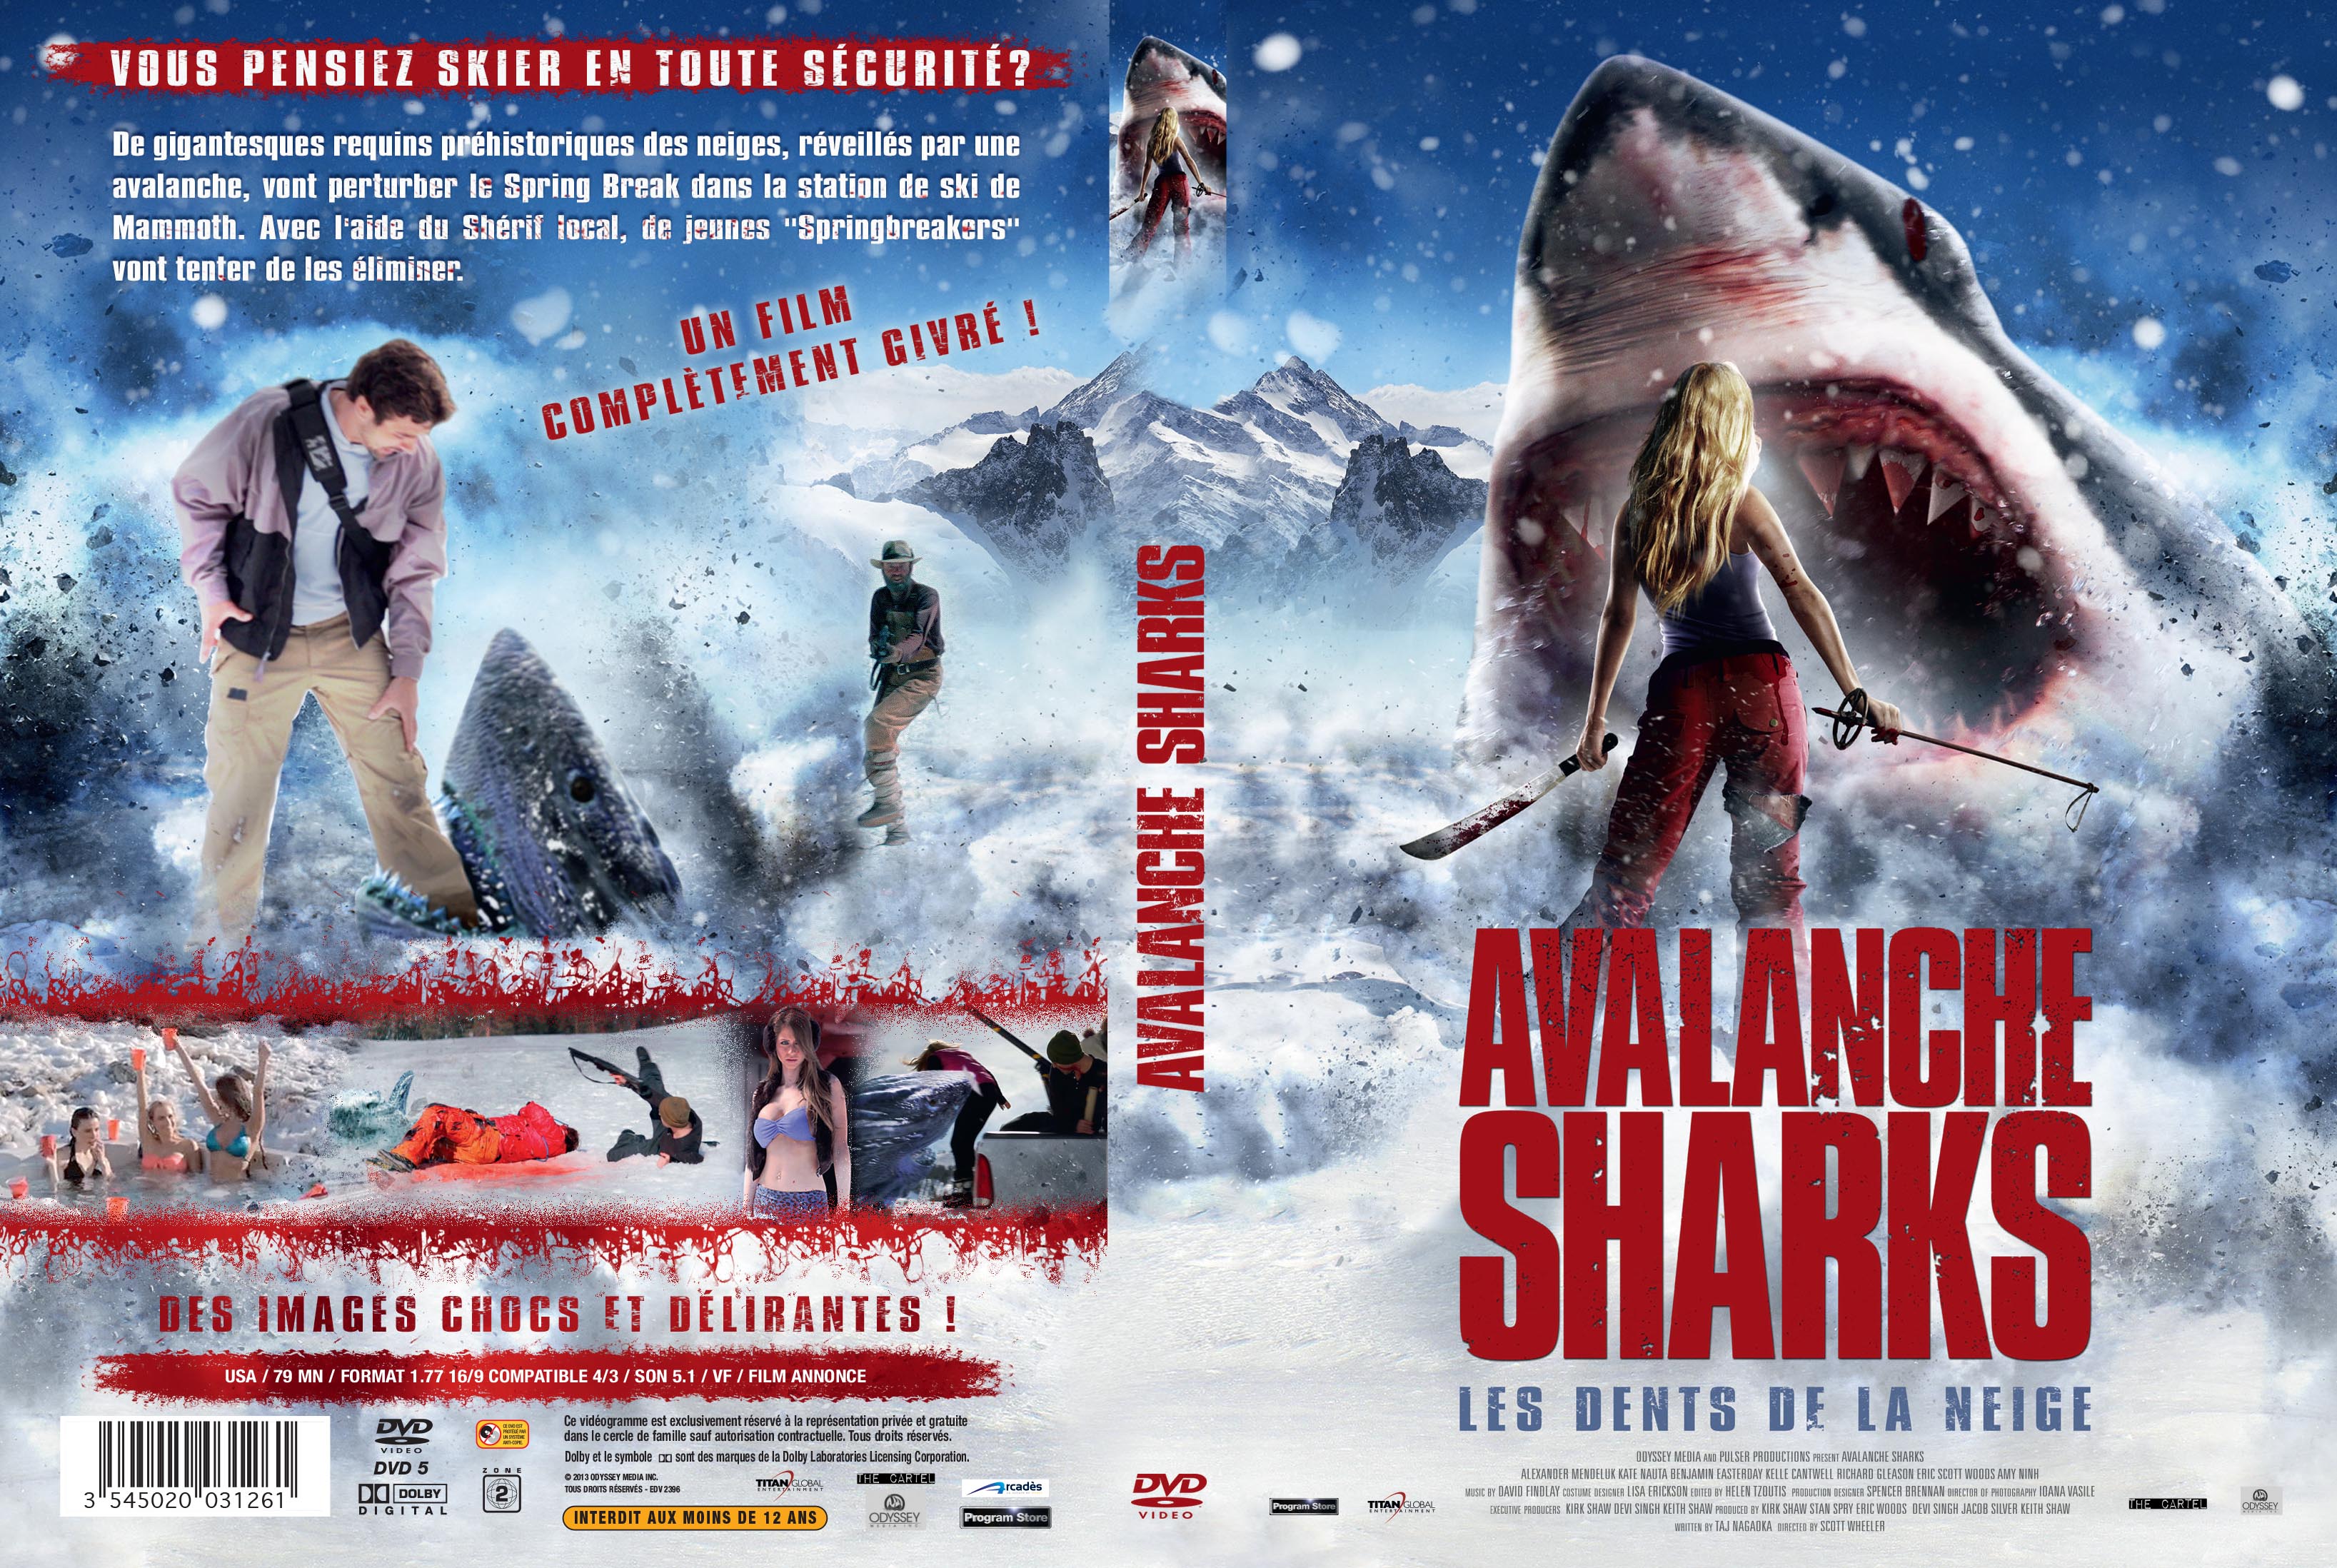 Jaquette DVD Avalanche Sharks